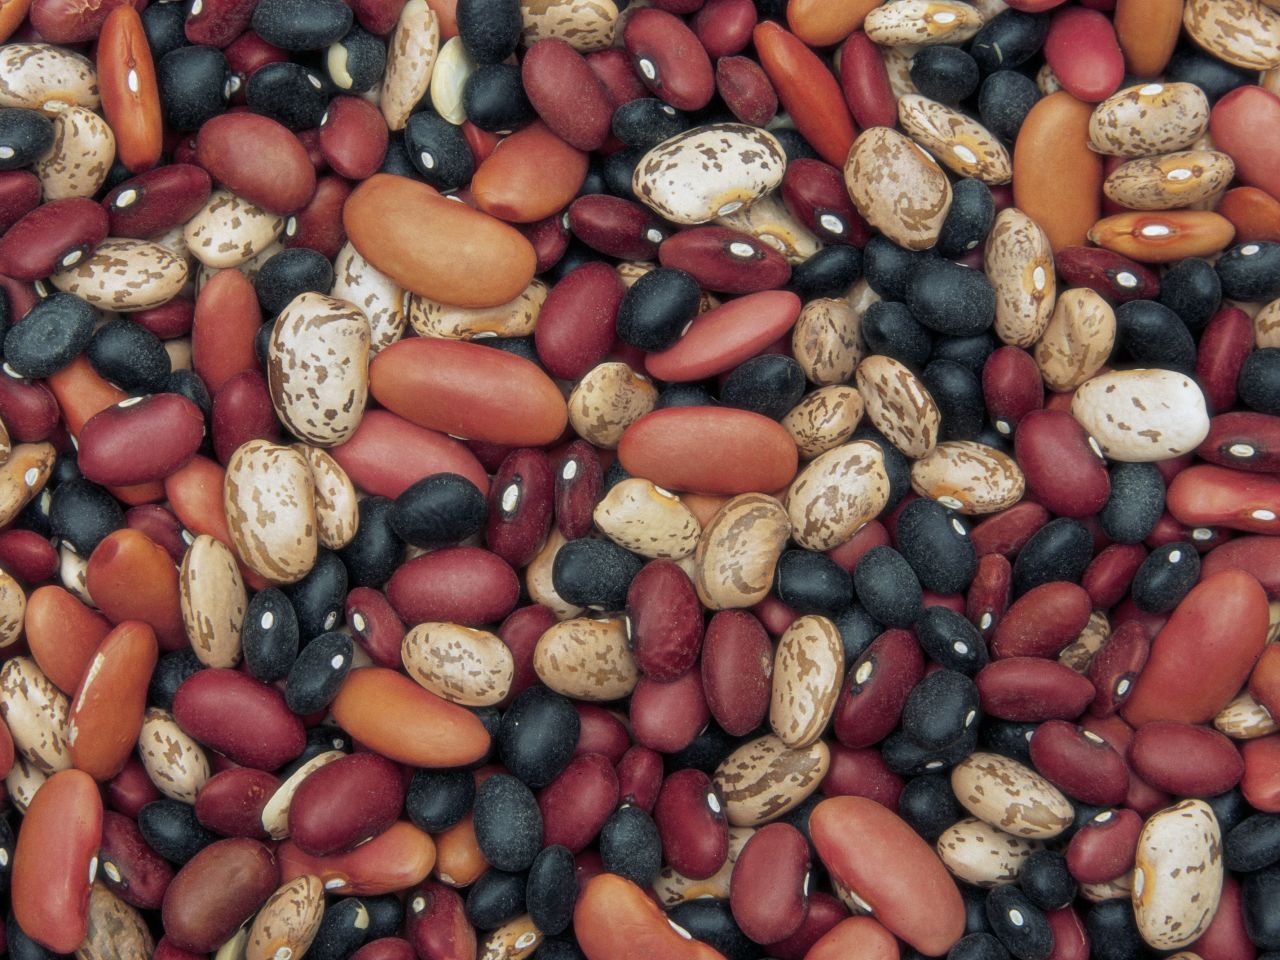 The protein in legumes activates an "I'm satisfied" message in the hunger center of your brain.